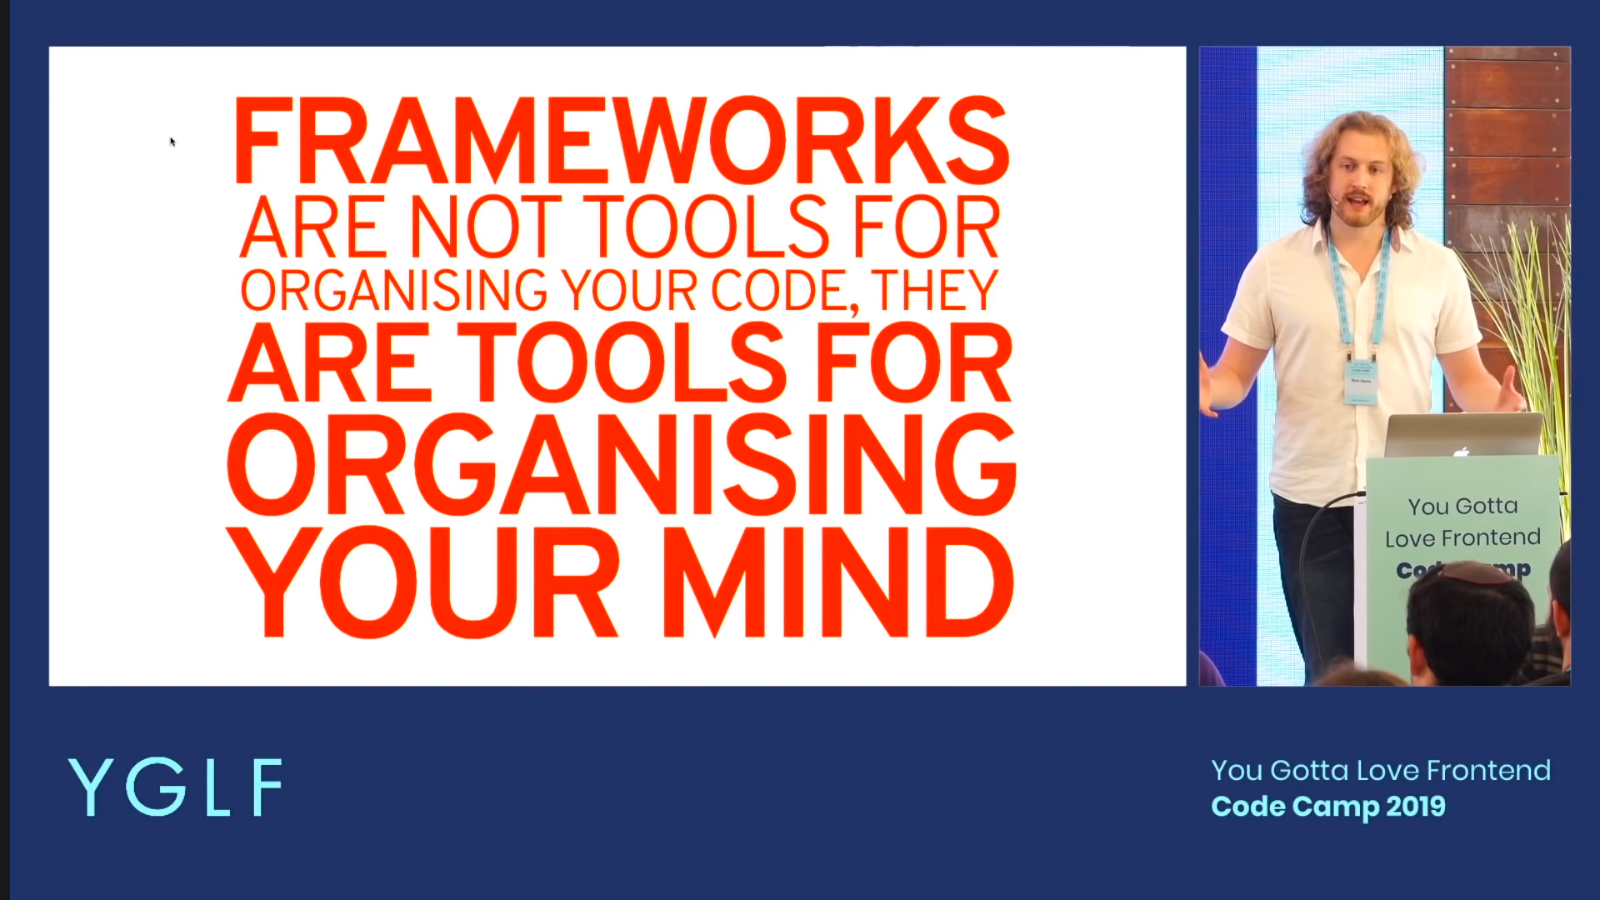 Frameworks are not tools for organising your code, They are tools for organising your mind.